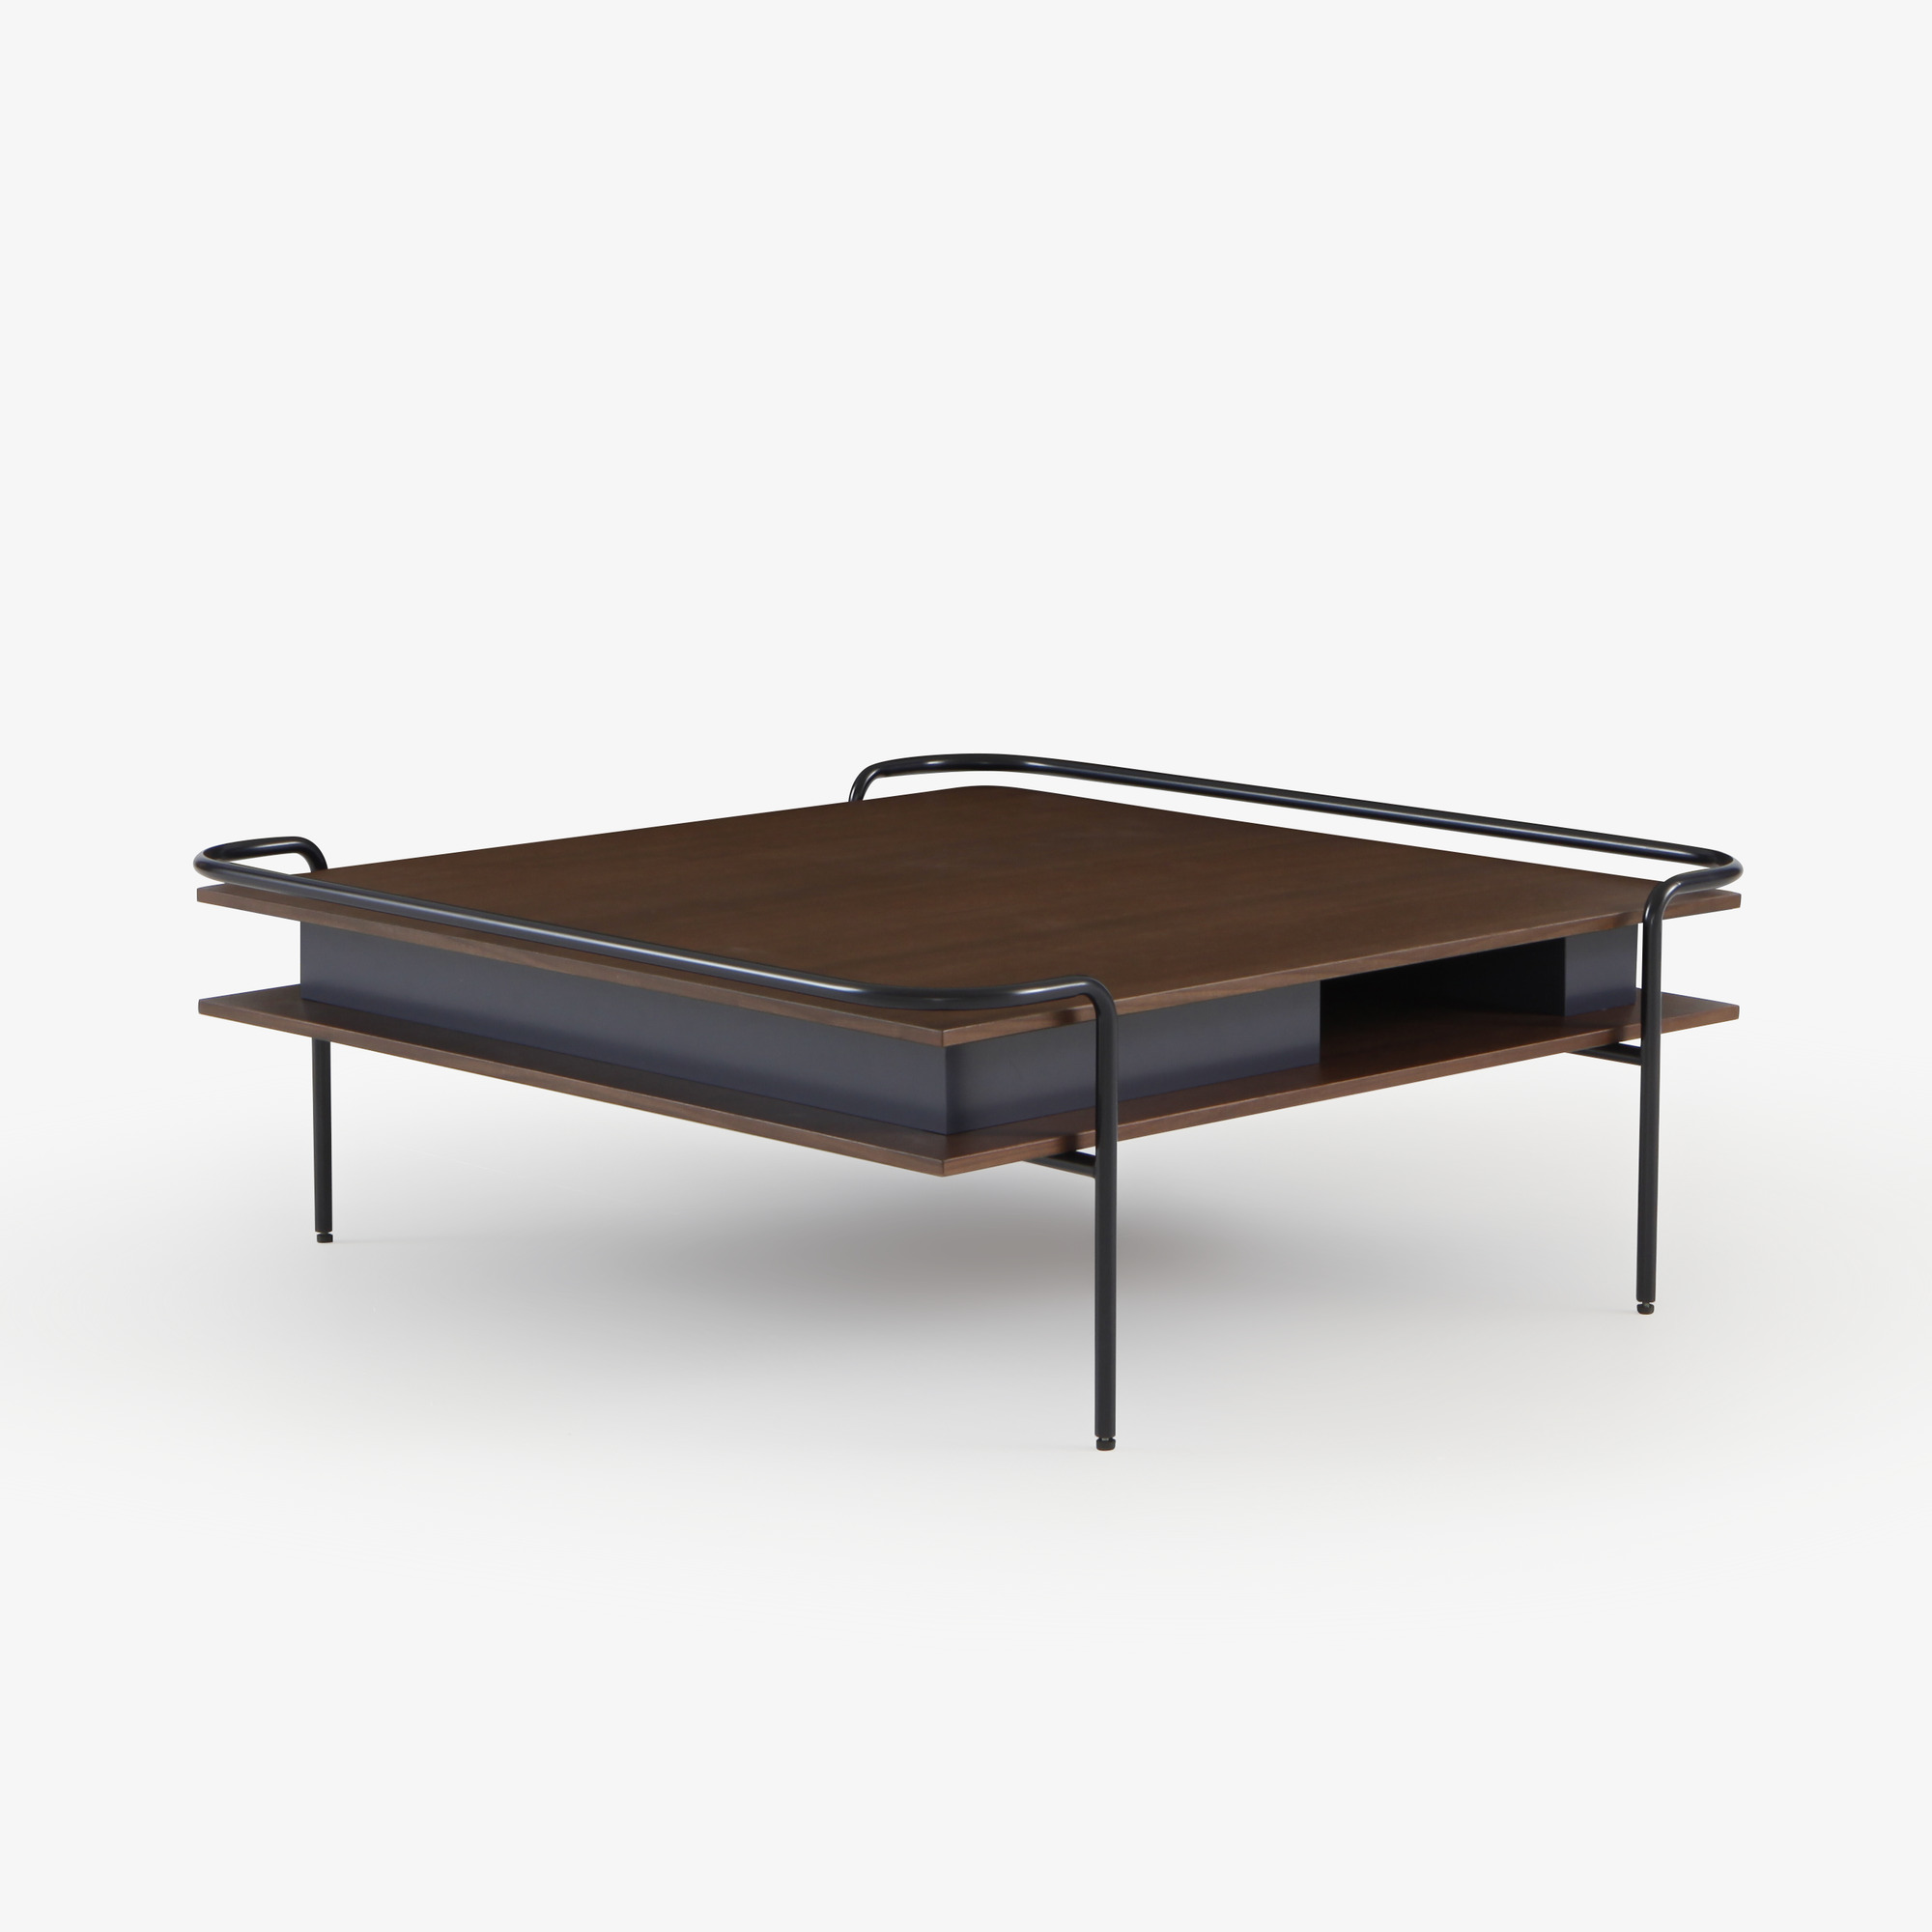 Image Square low table   5